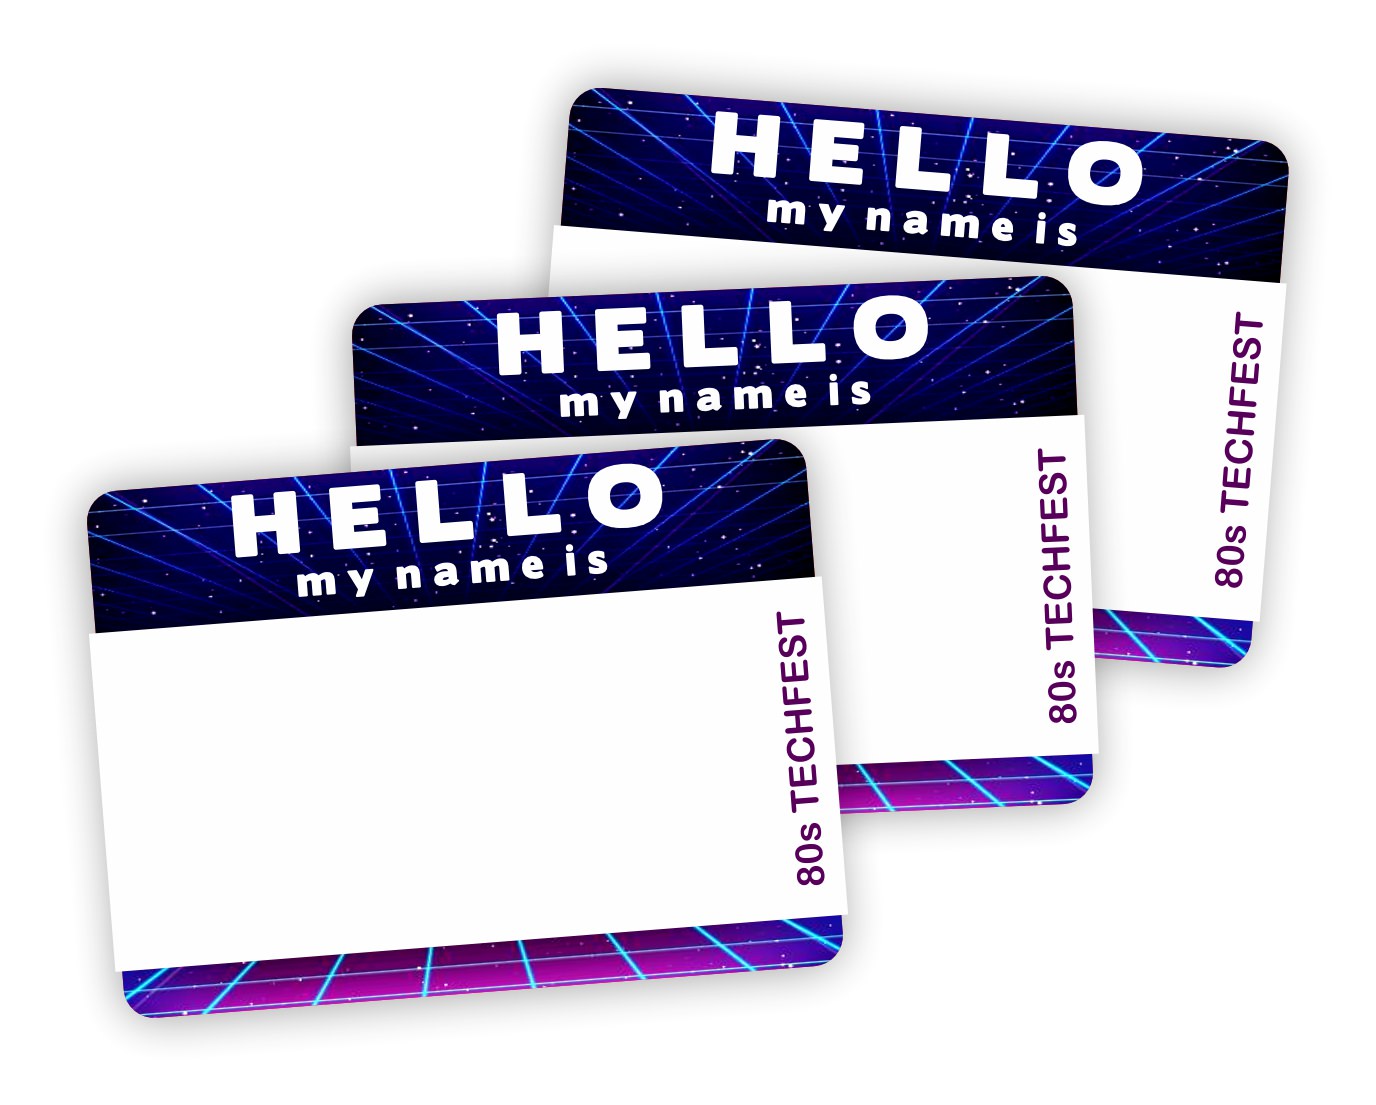 Alternative design of hello my name is labels